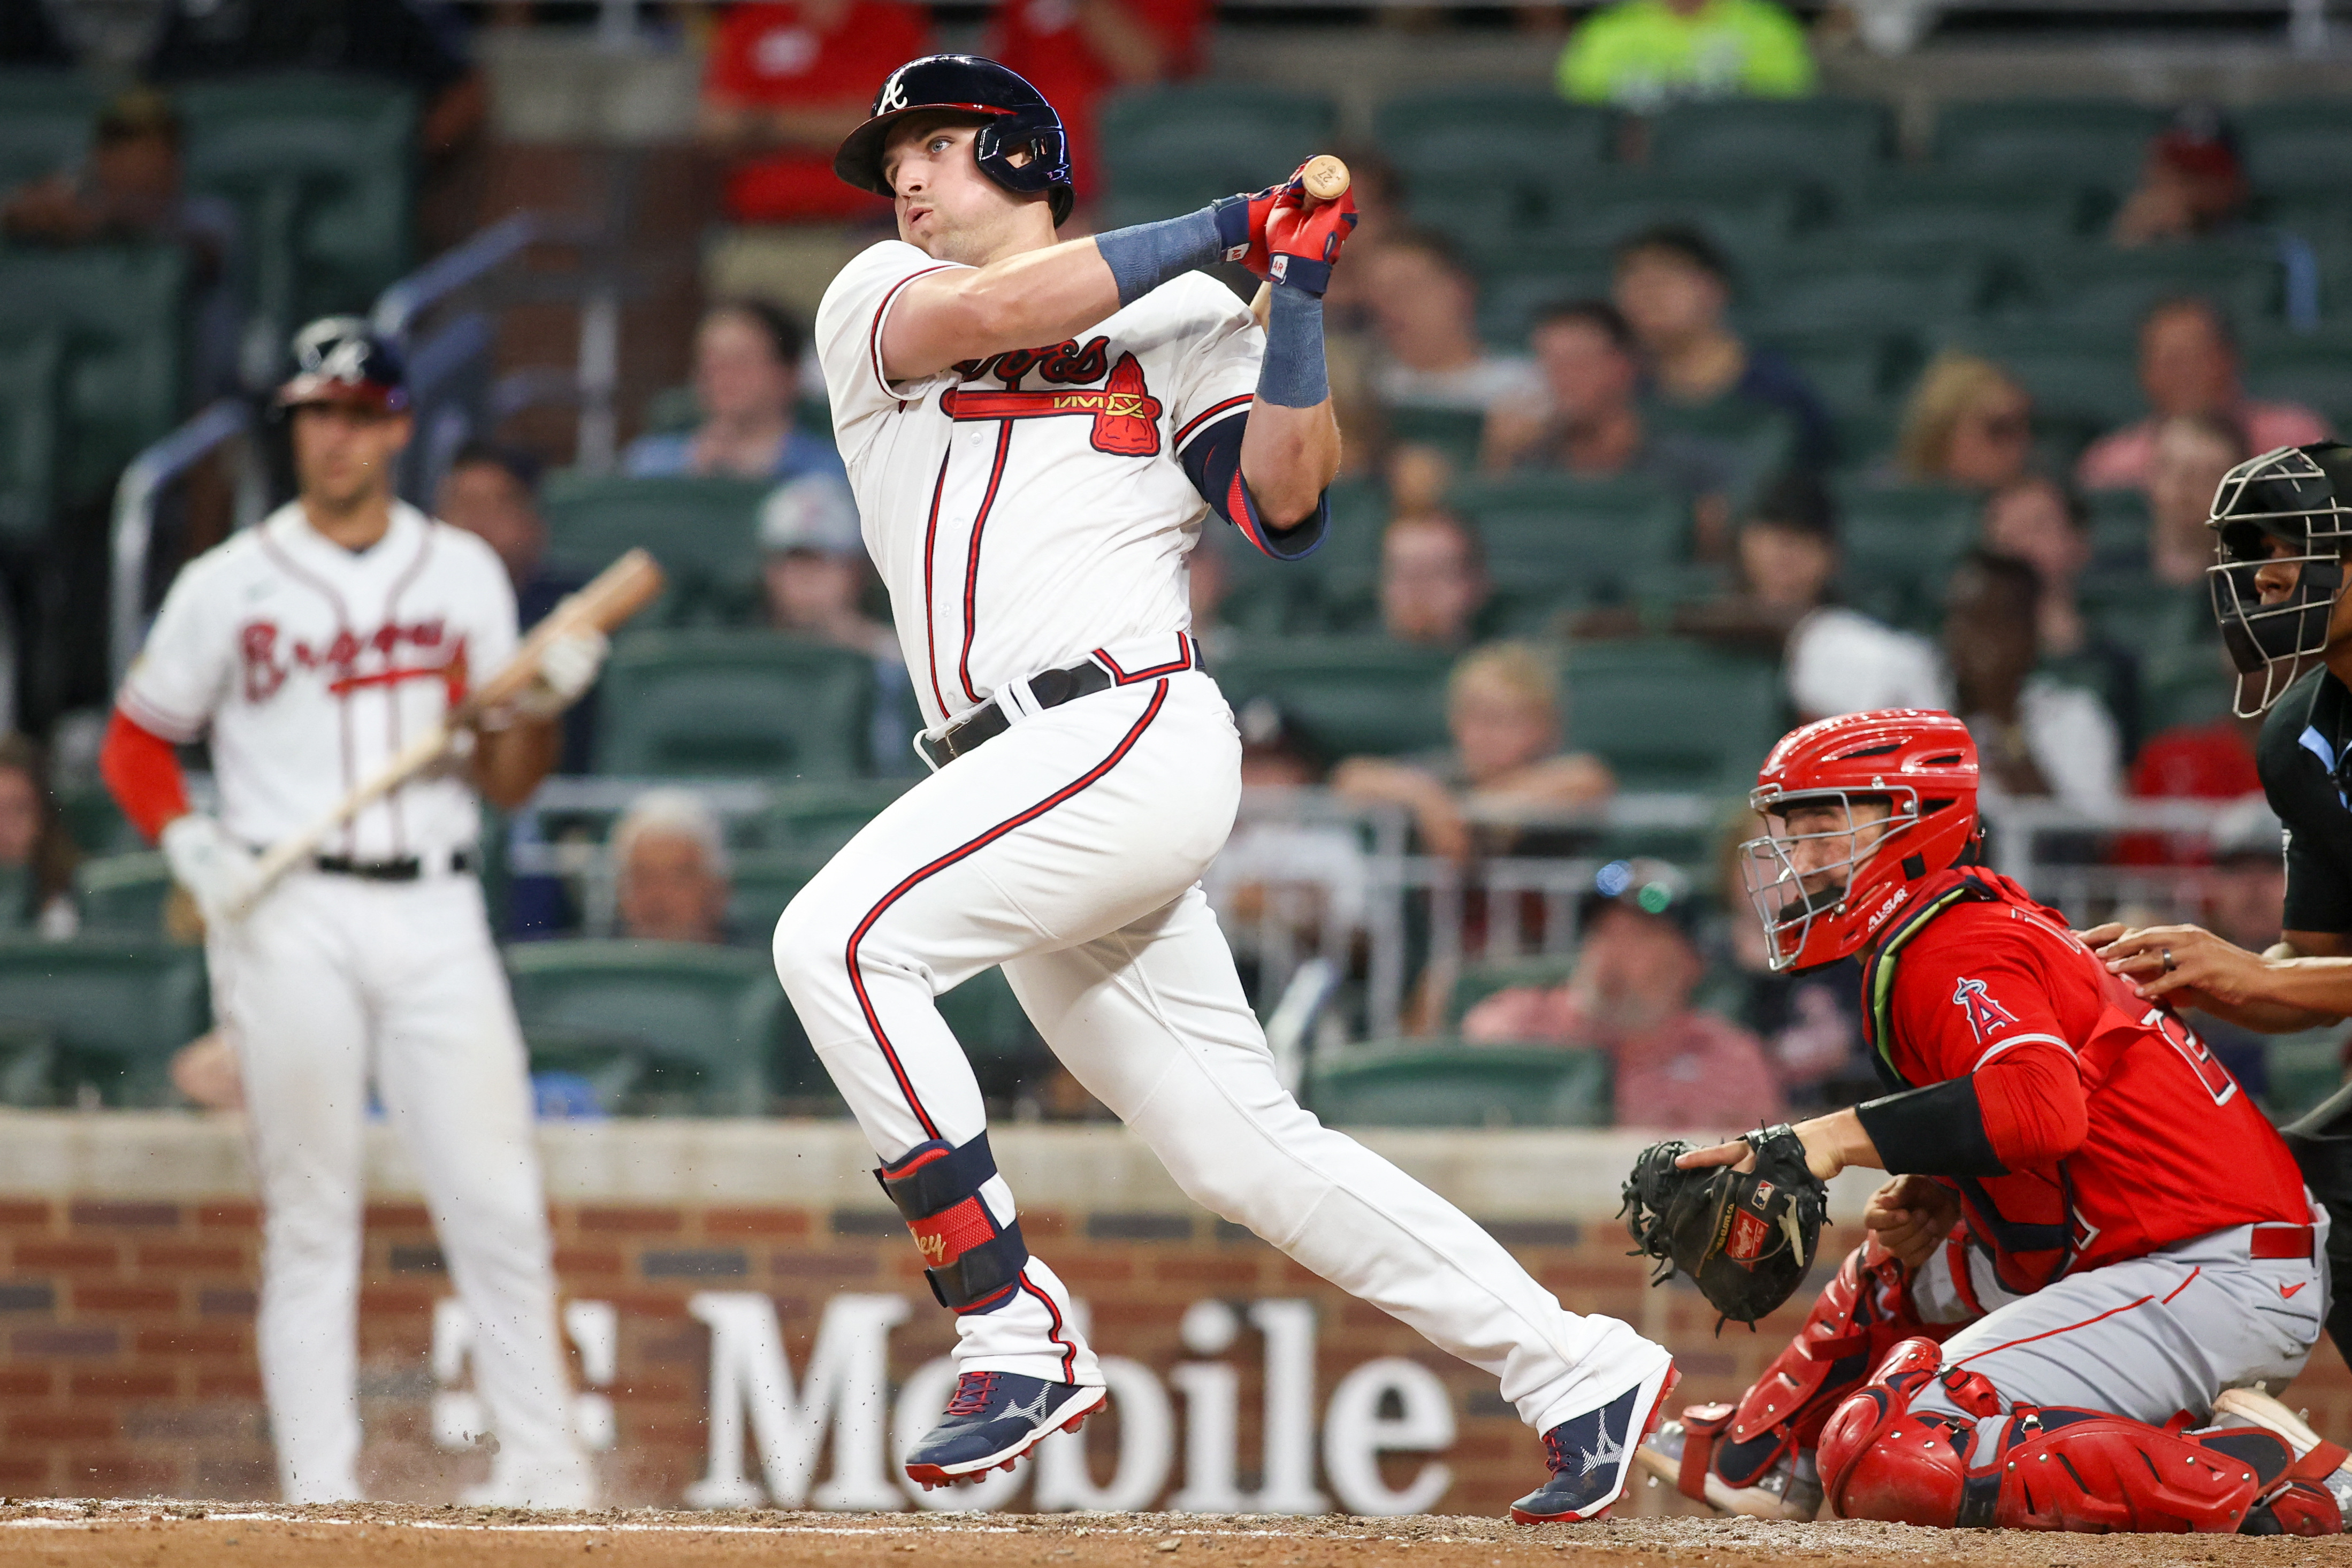 Braves agree to contract extension with All-Star catcher